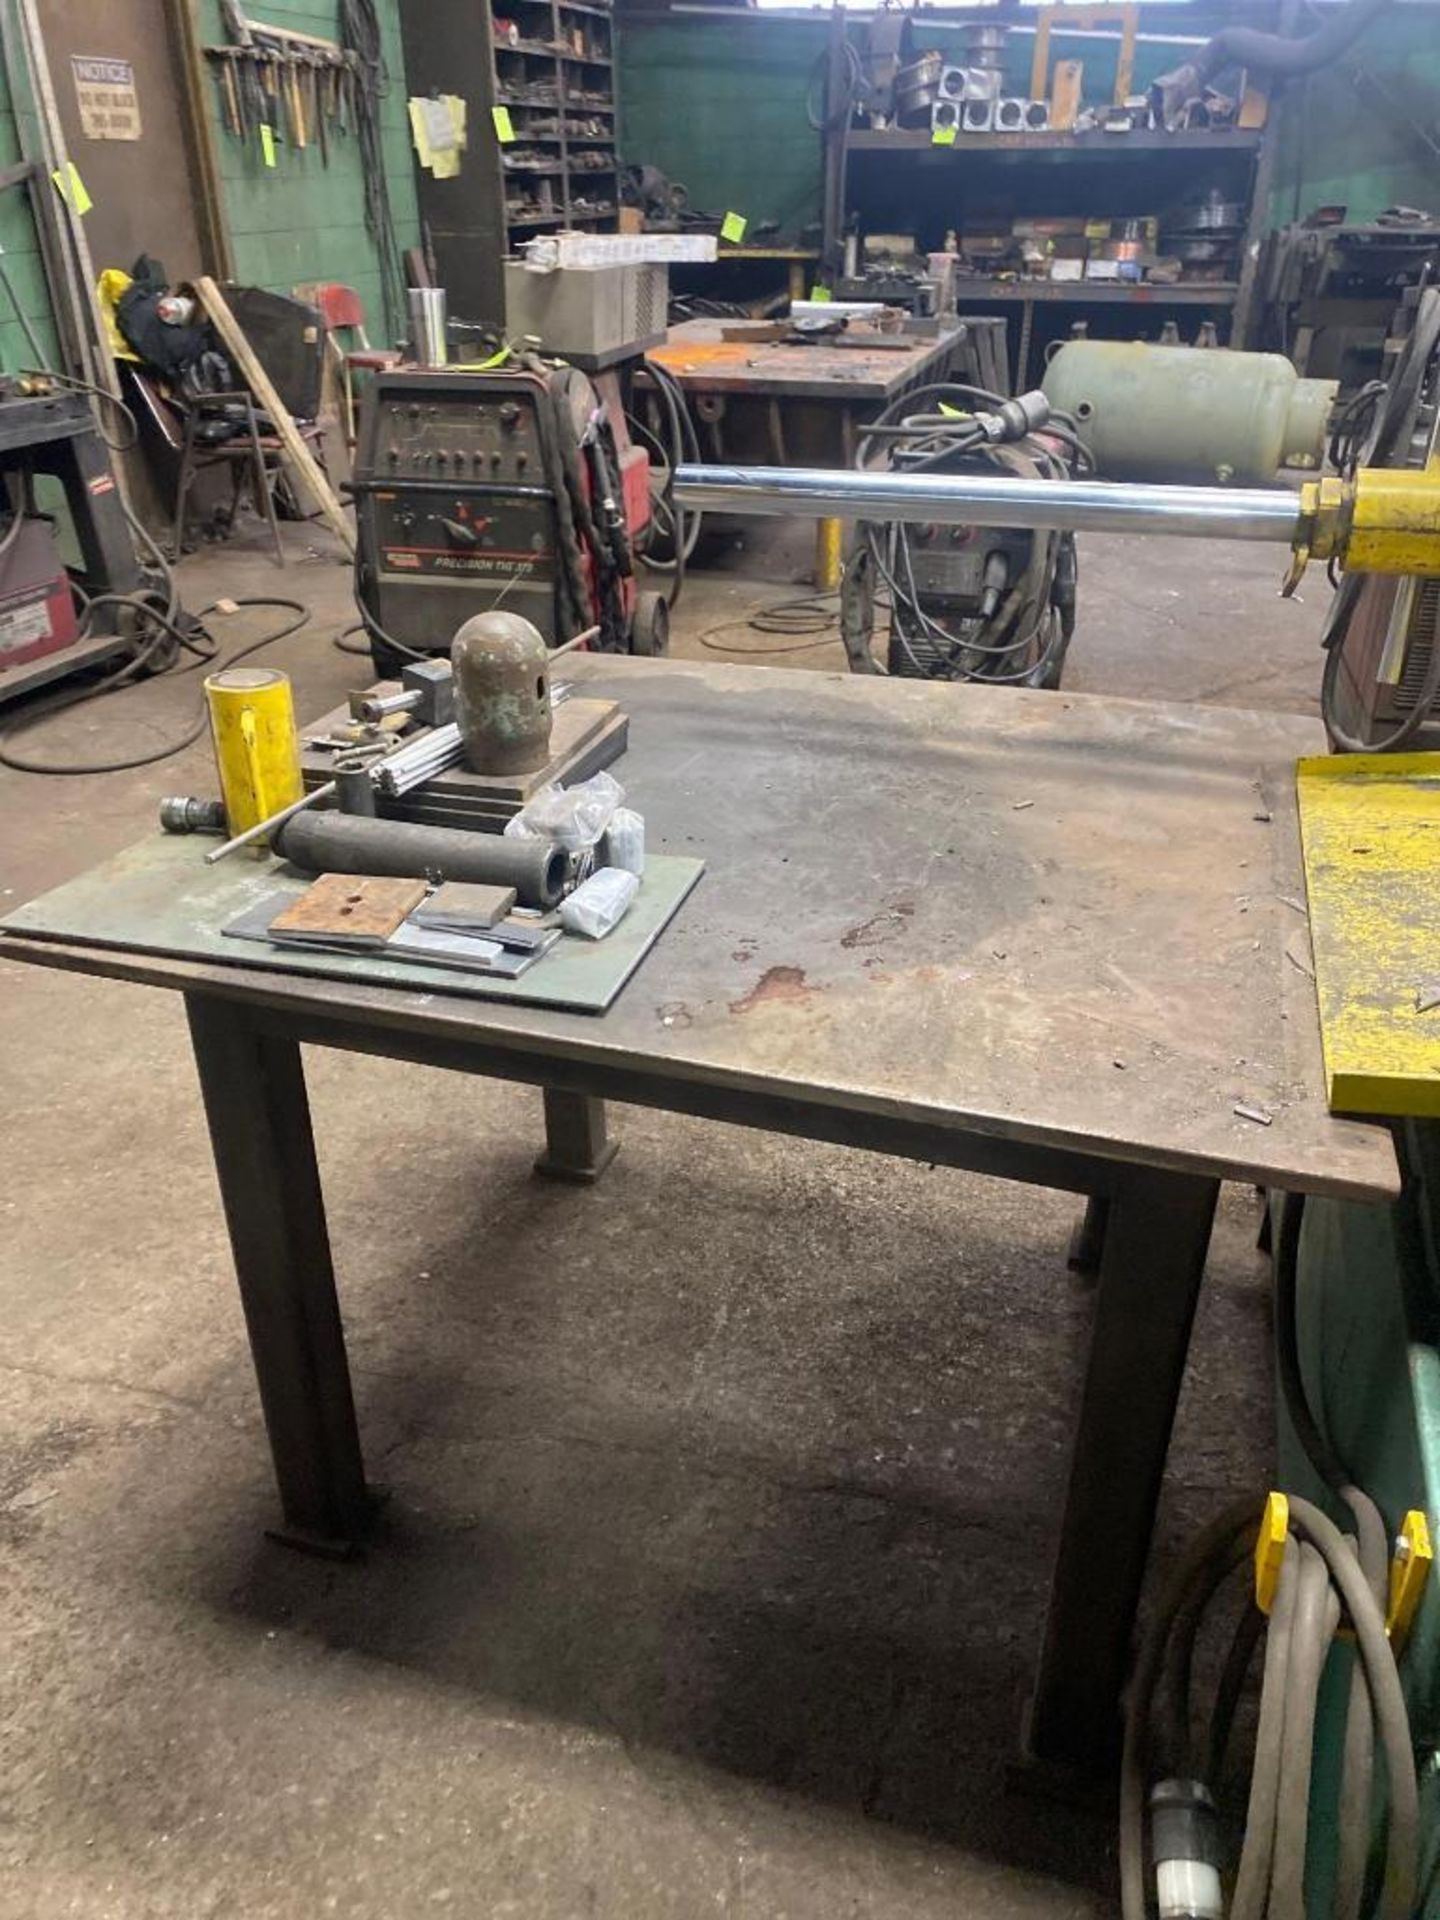 45in x 41in x 5/8in Steel Welding Table w/ Contents - Image 3 of 3